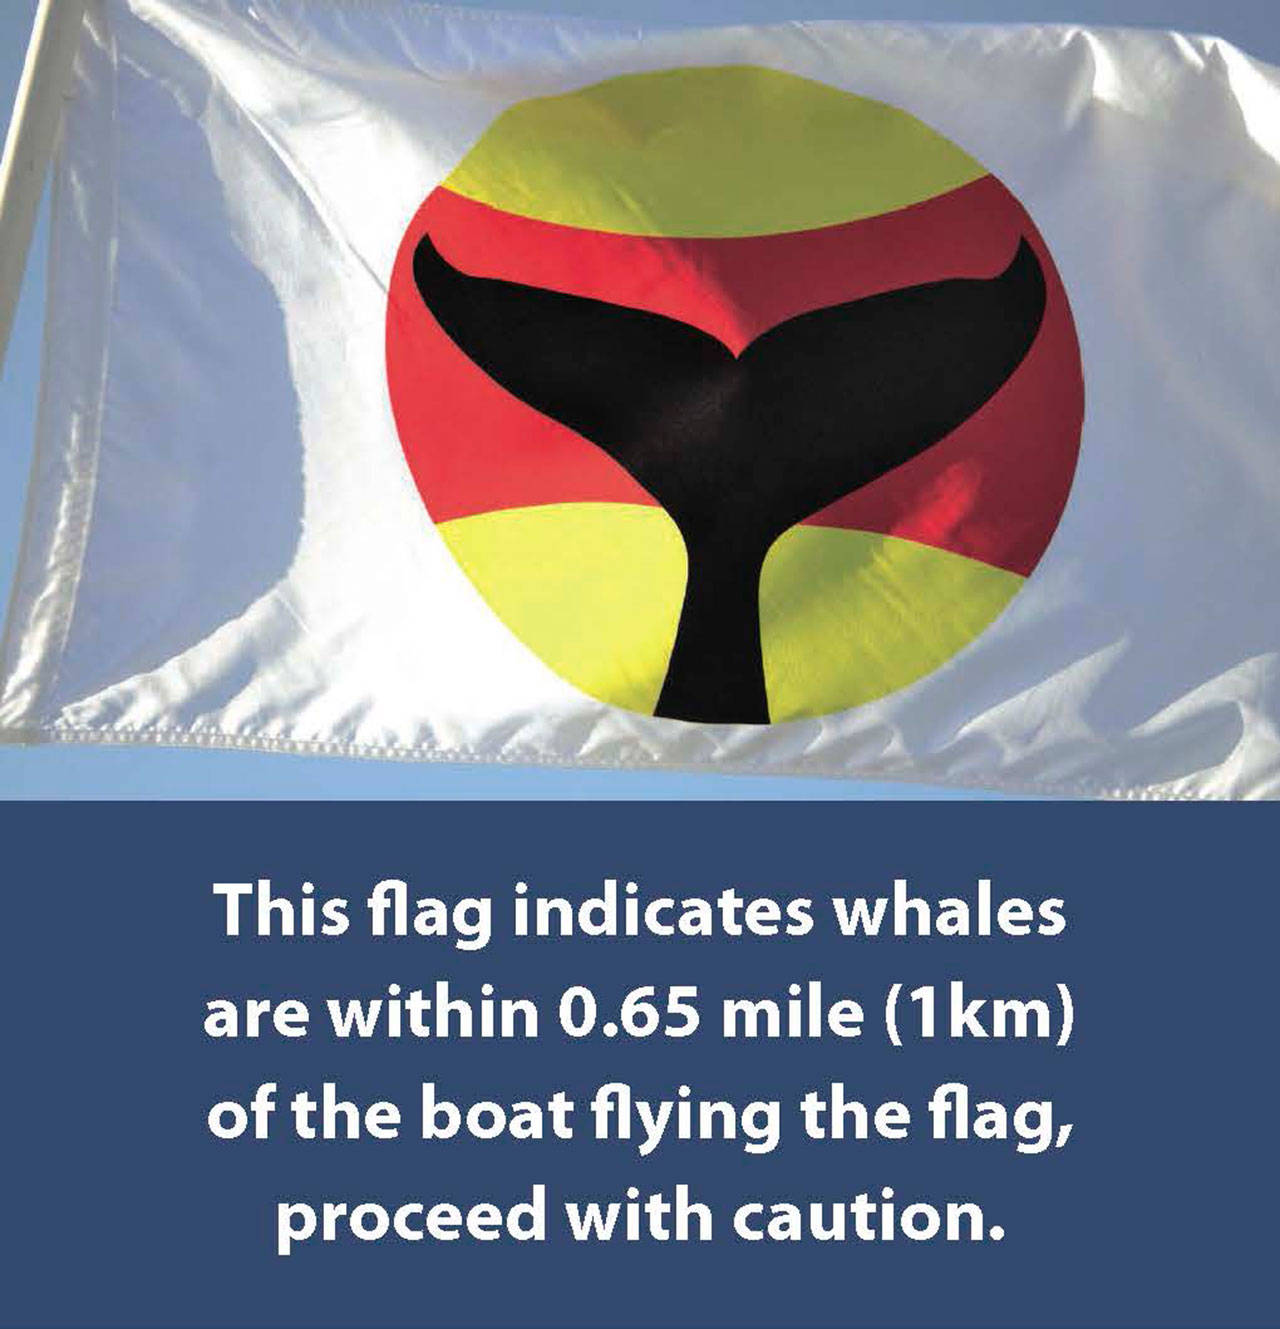 San Juan County launches Whale Warning flags to protect local whales | Update